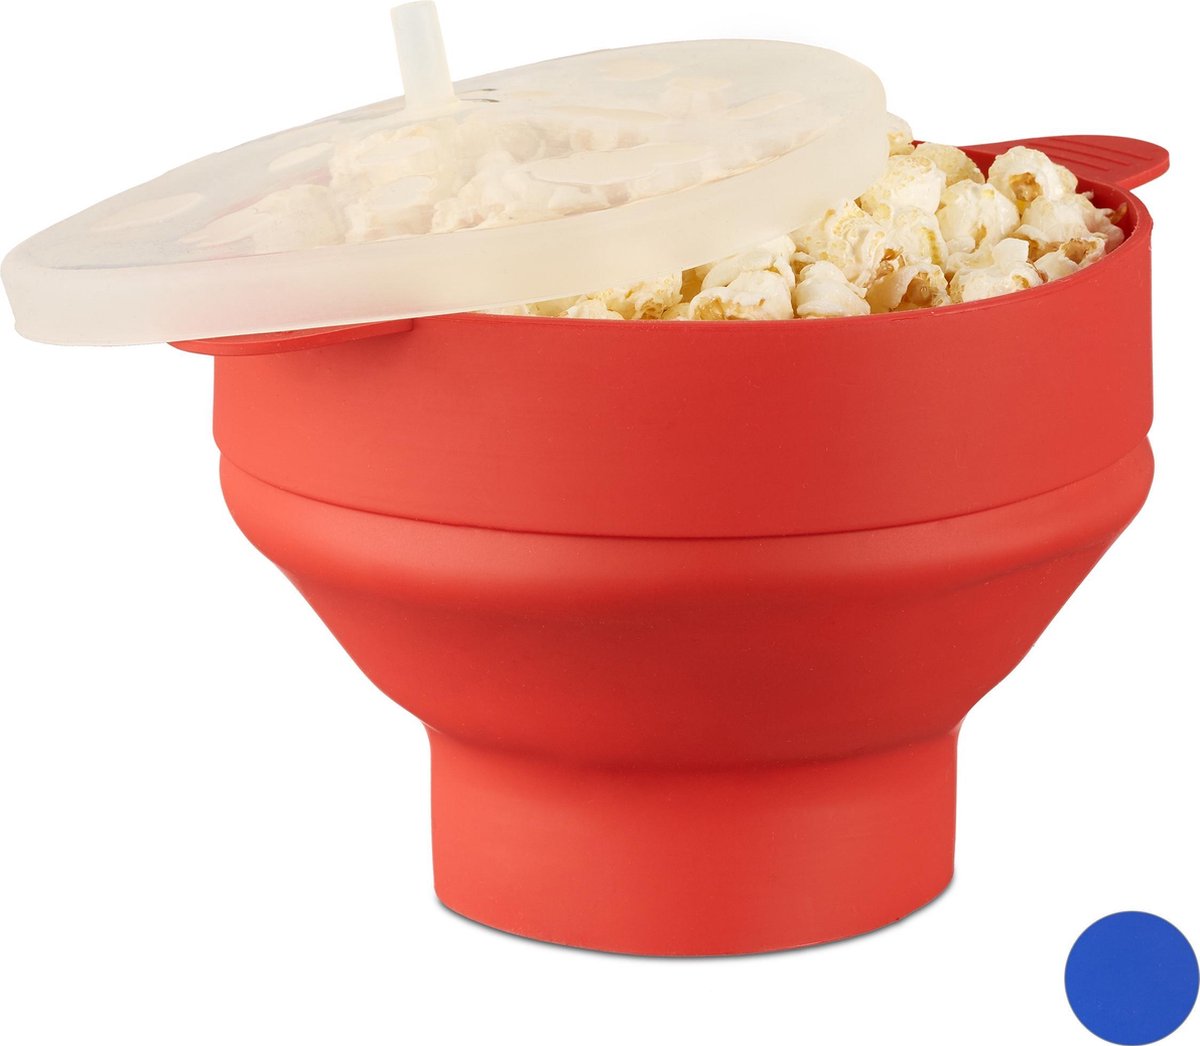 Relaxdays popcorn maker silicone - voor magnetron - popcorn popper - opvouwbaar - silicoon - rood